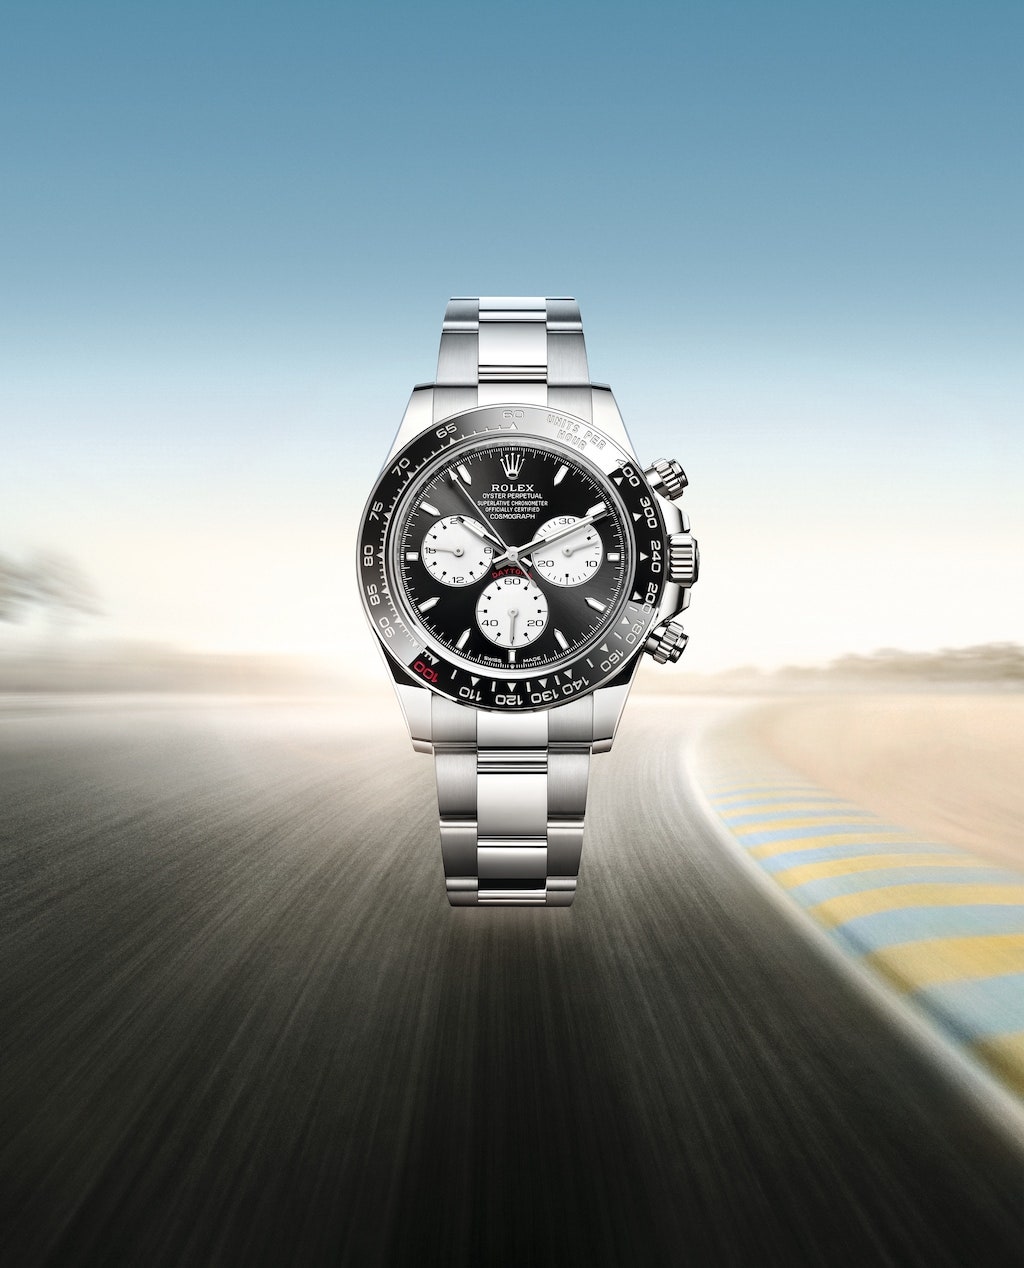 A sidebyside of the new specialedition Rolex Daytona  and the redesigned version of the watch released in late March of...